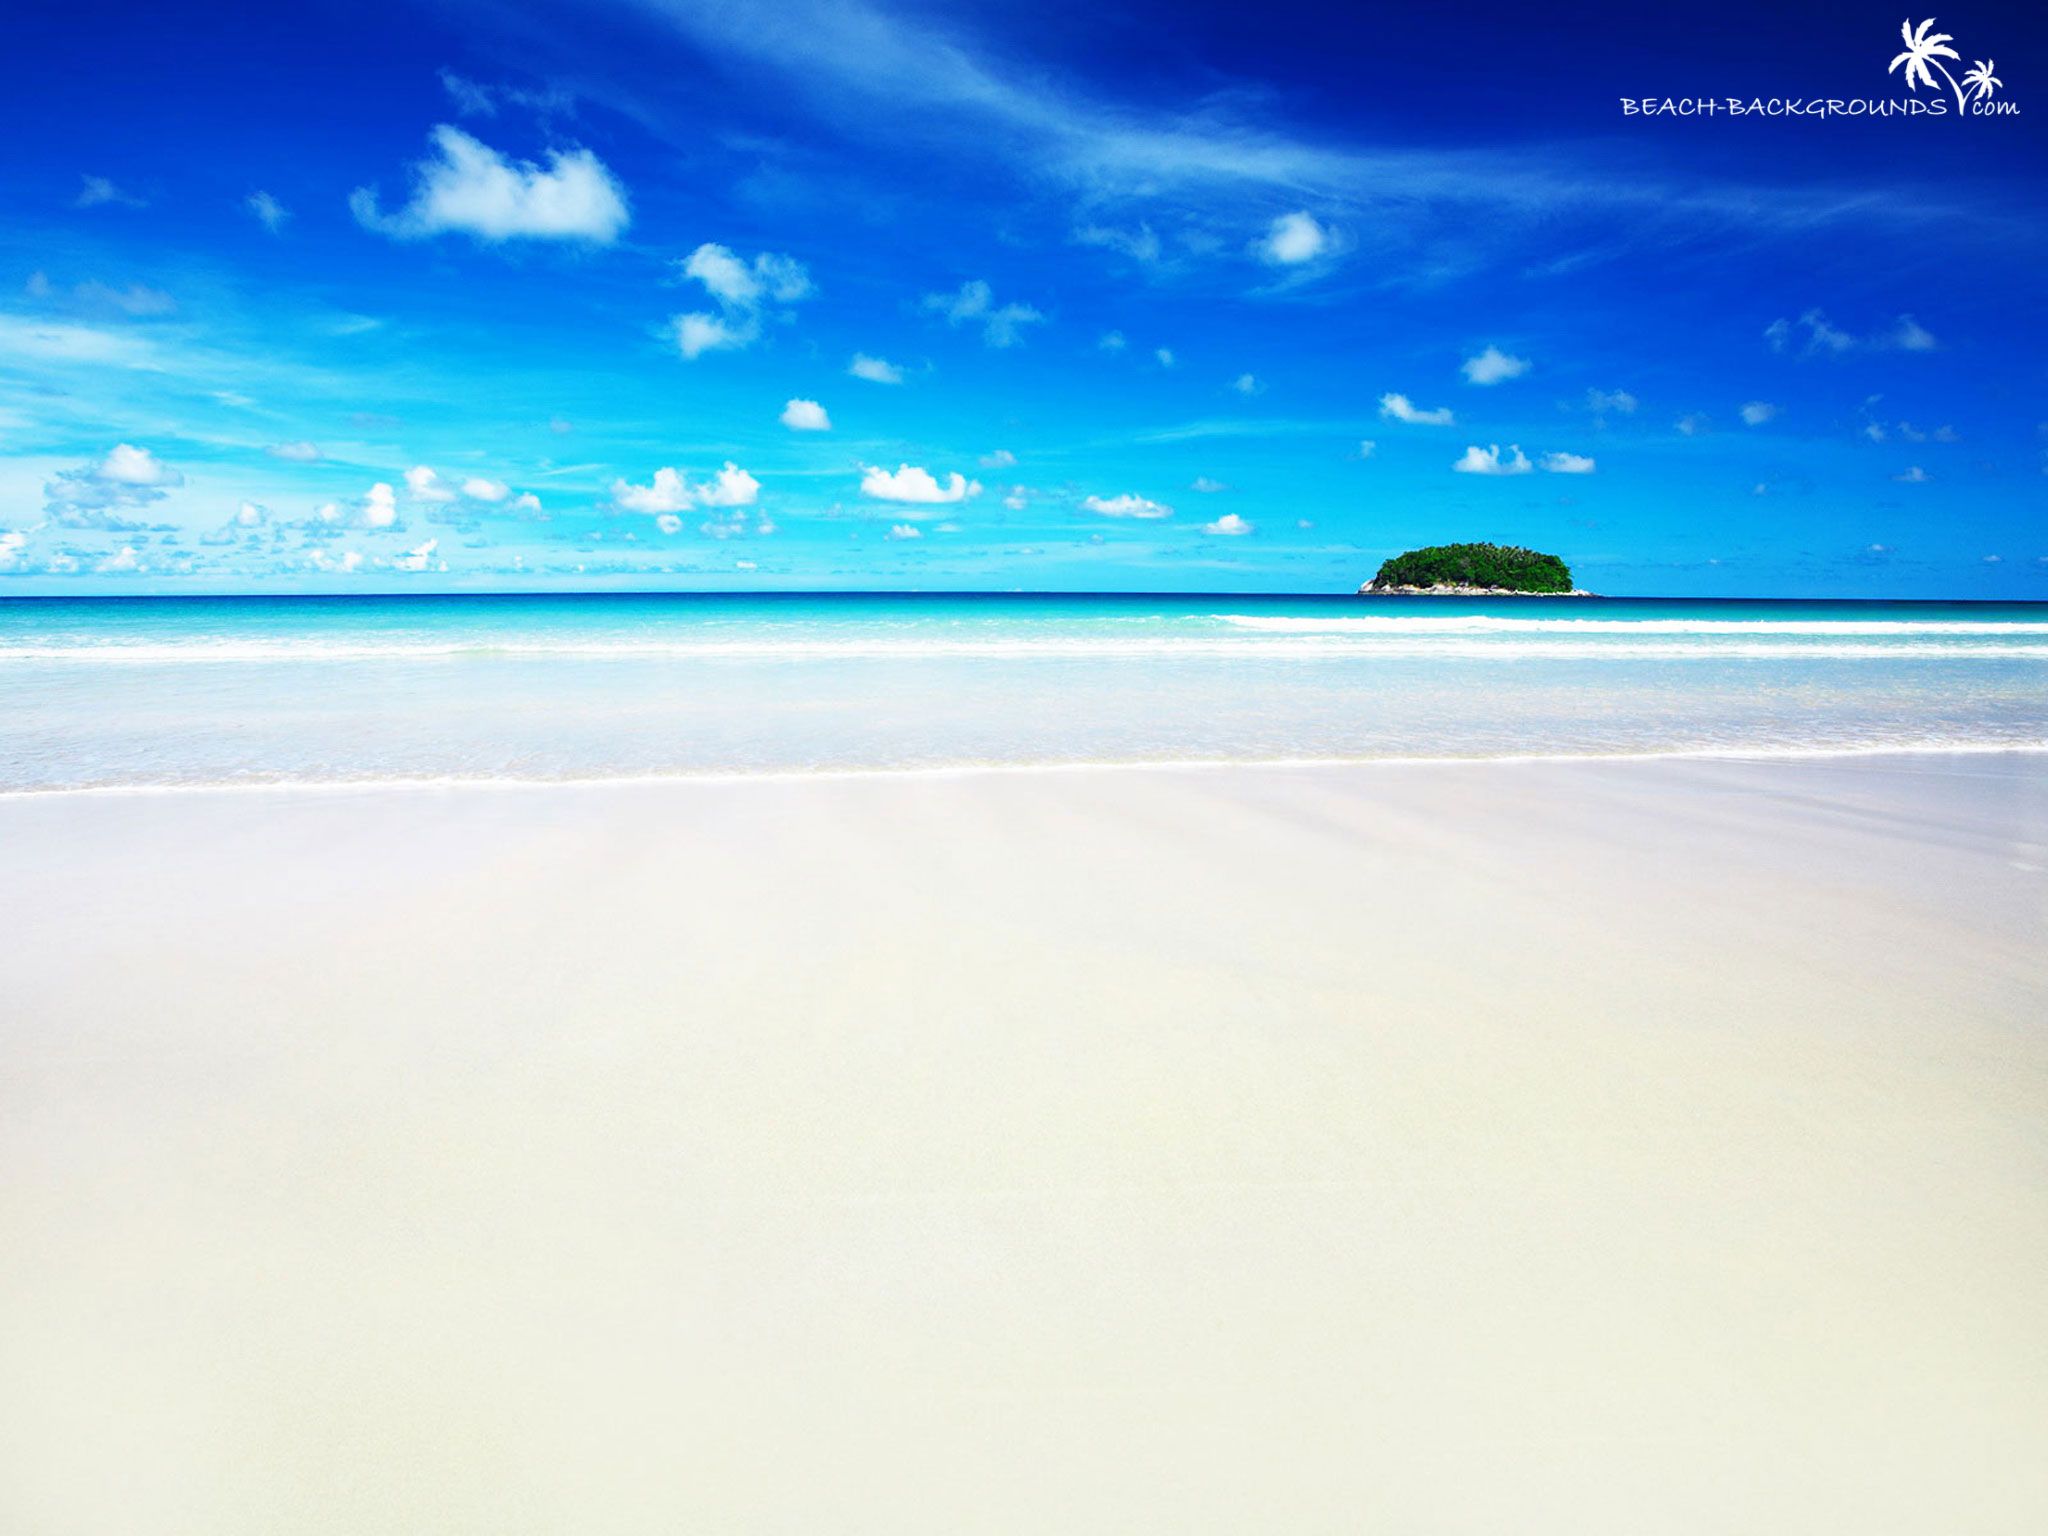 Awesome white sand beach - Beach Backgrounds